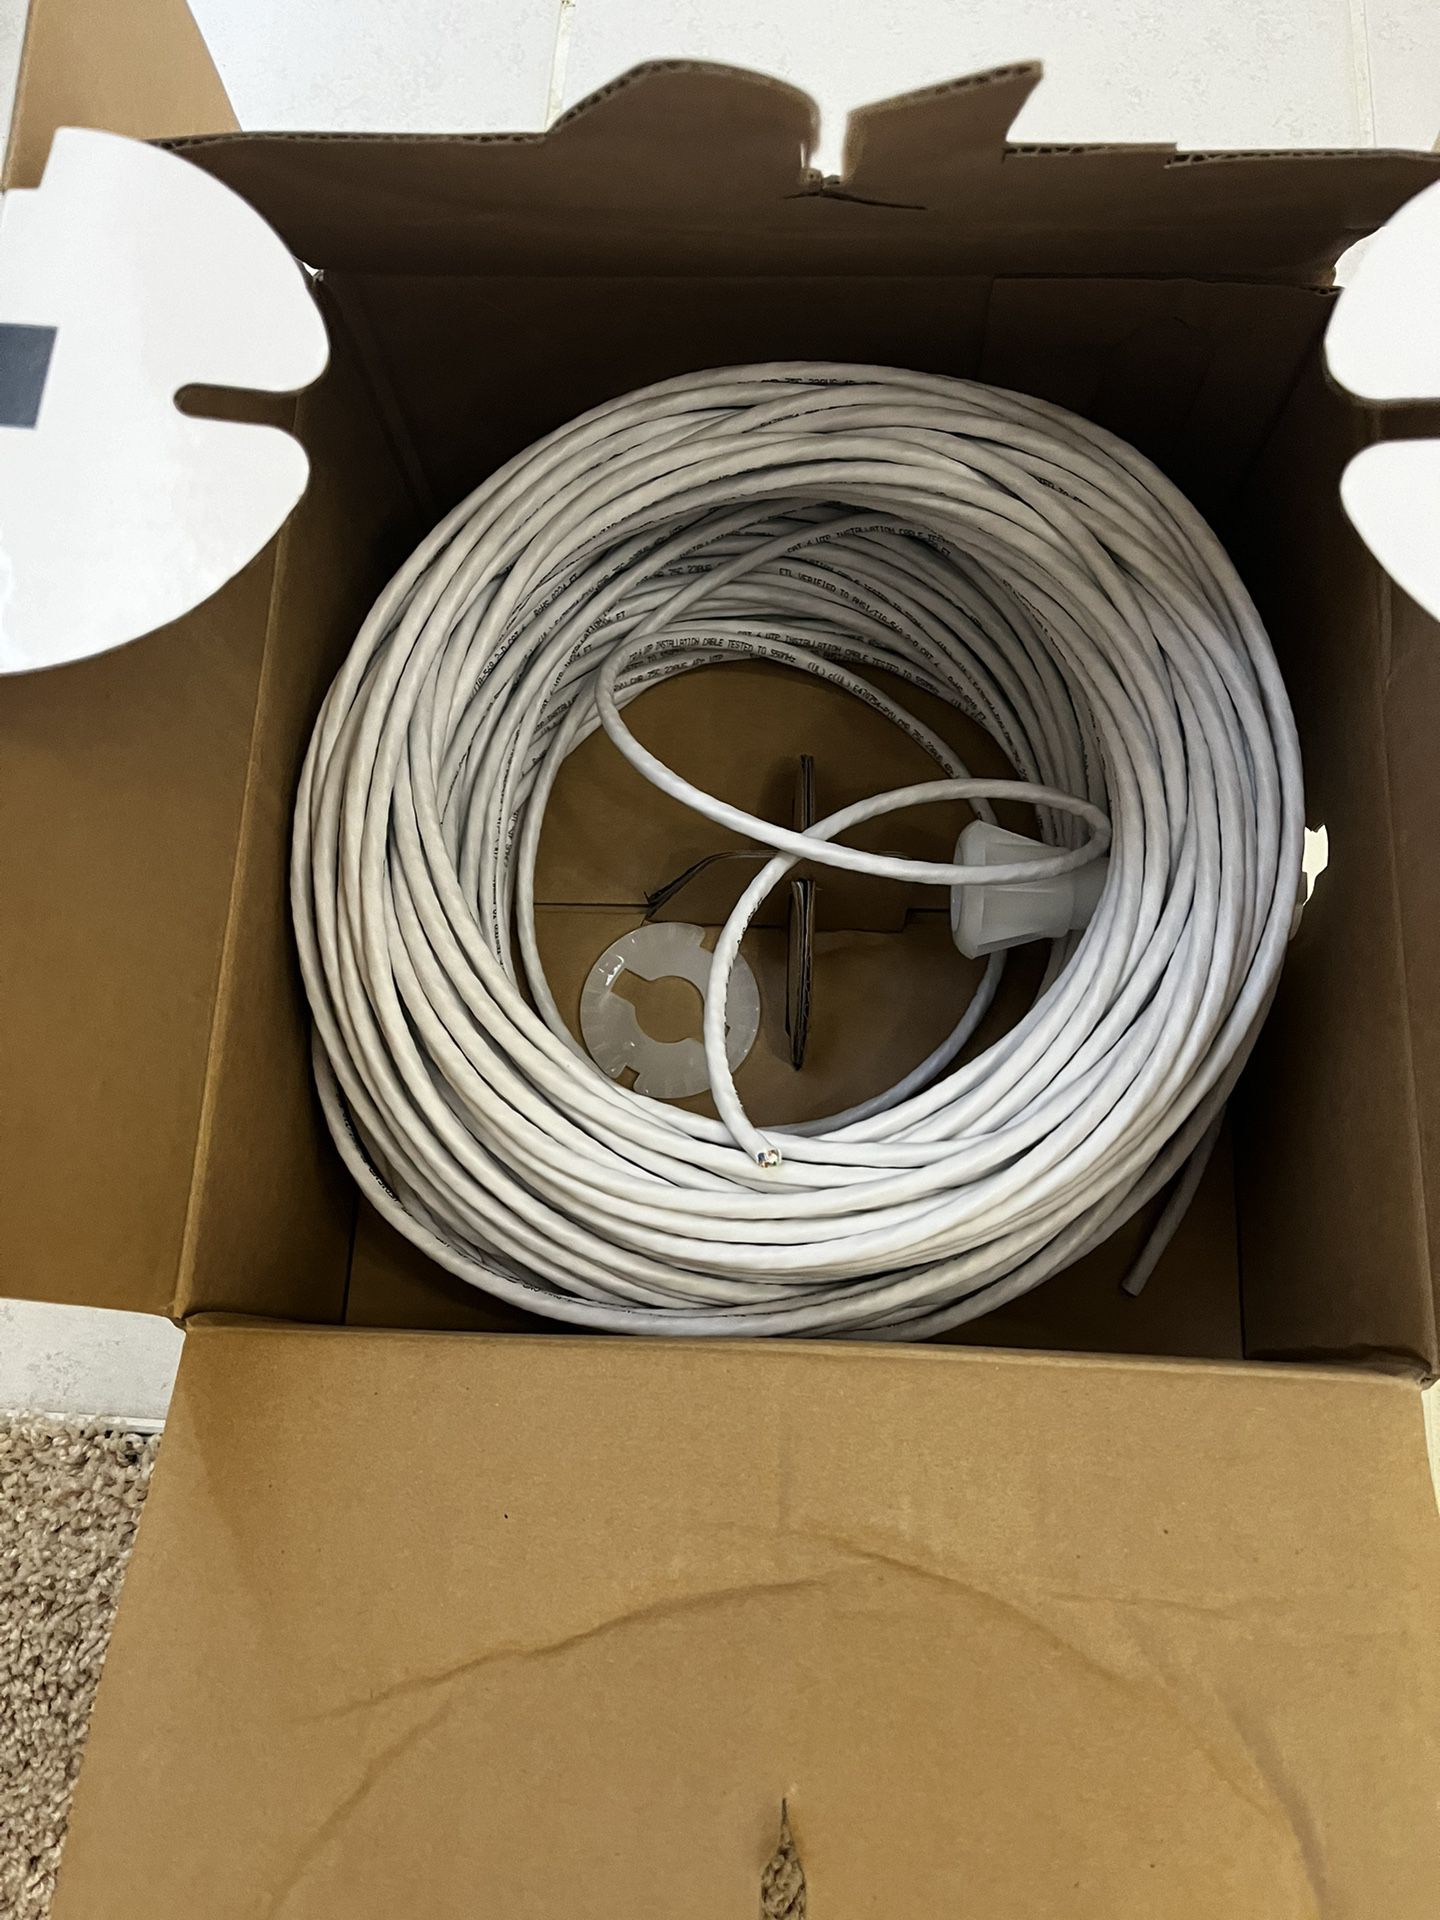 CAT 6 Ethernet cable